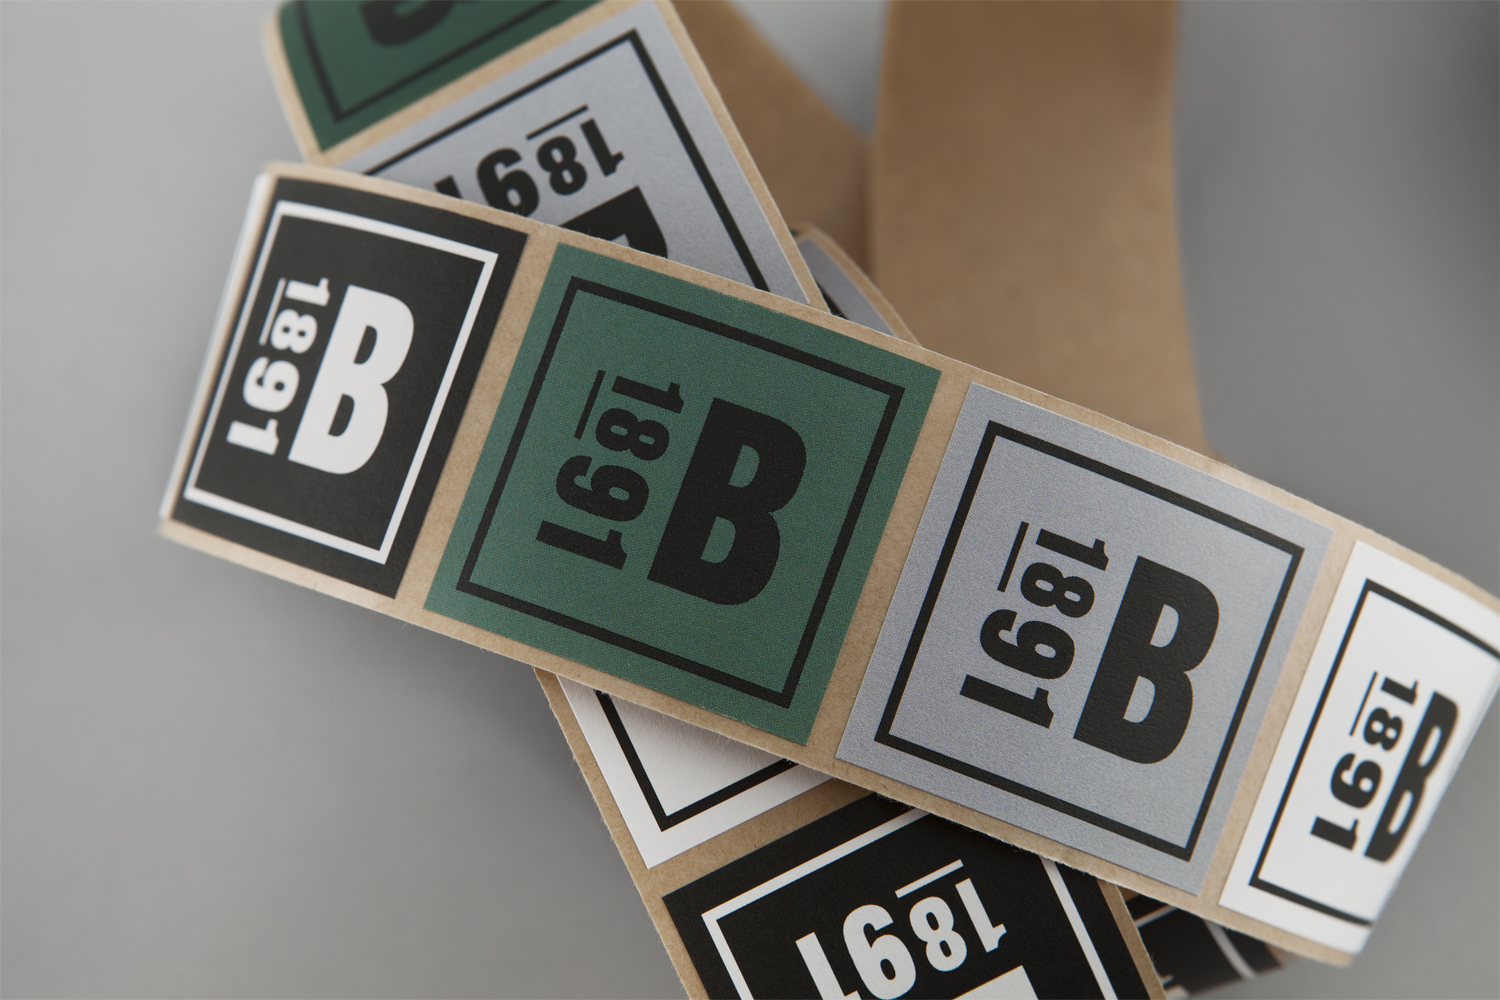 Visual identity and stickers designed by Blok for Toronto's The Broadview Hotel